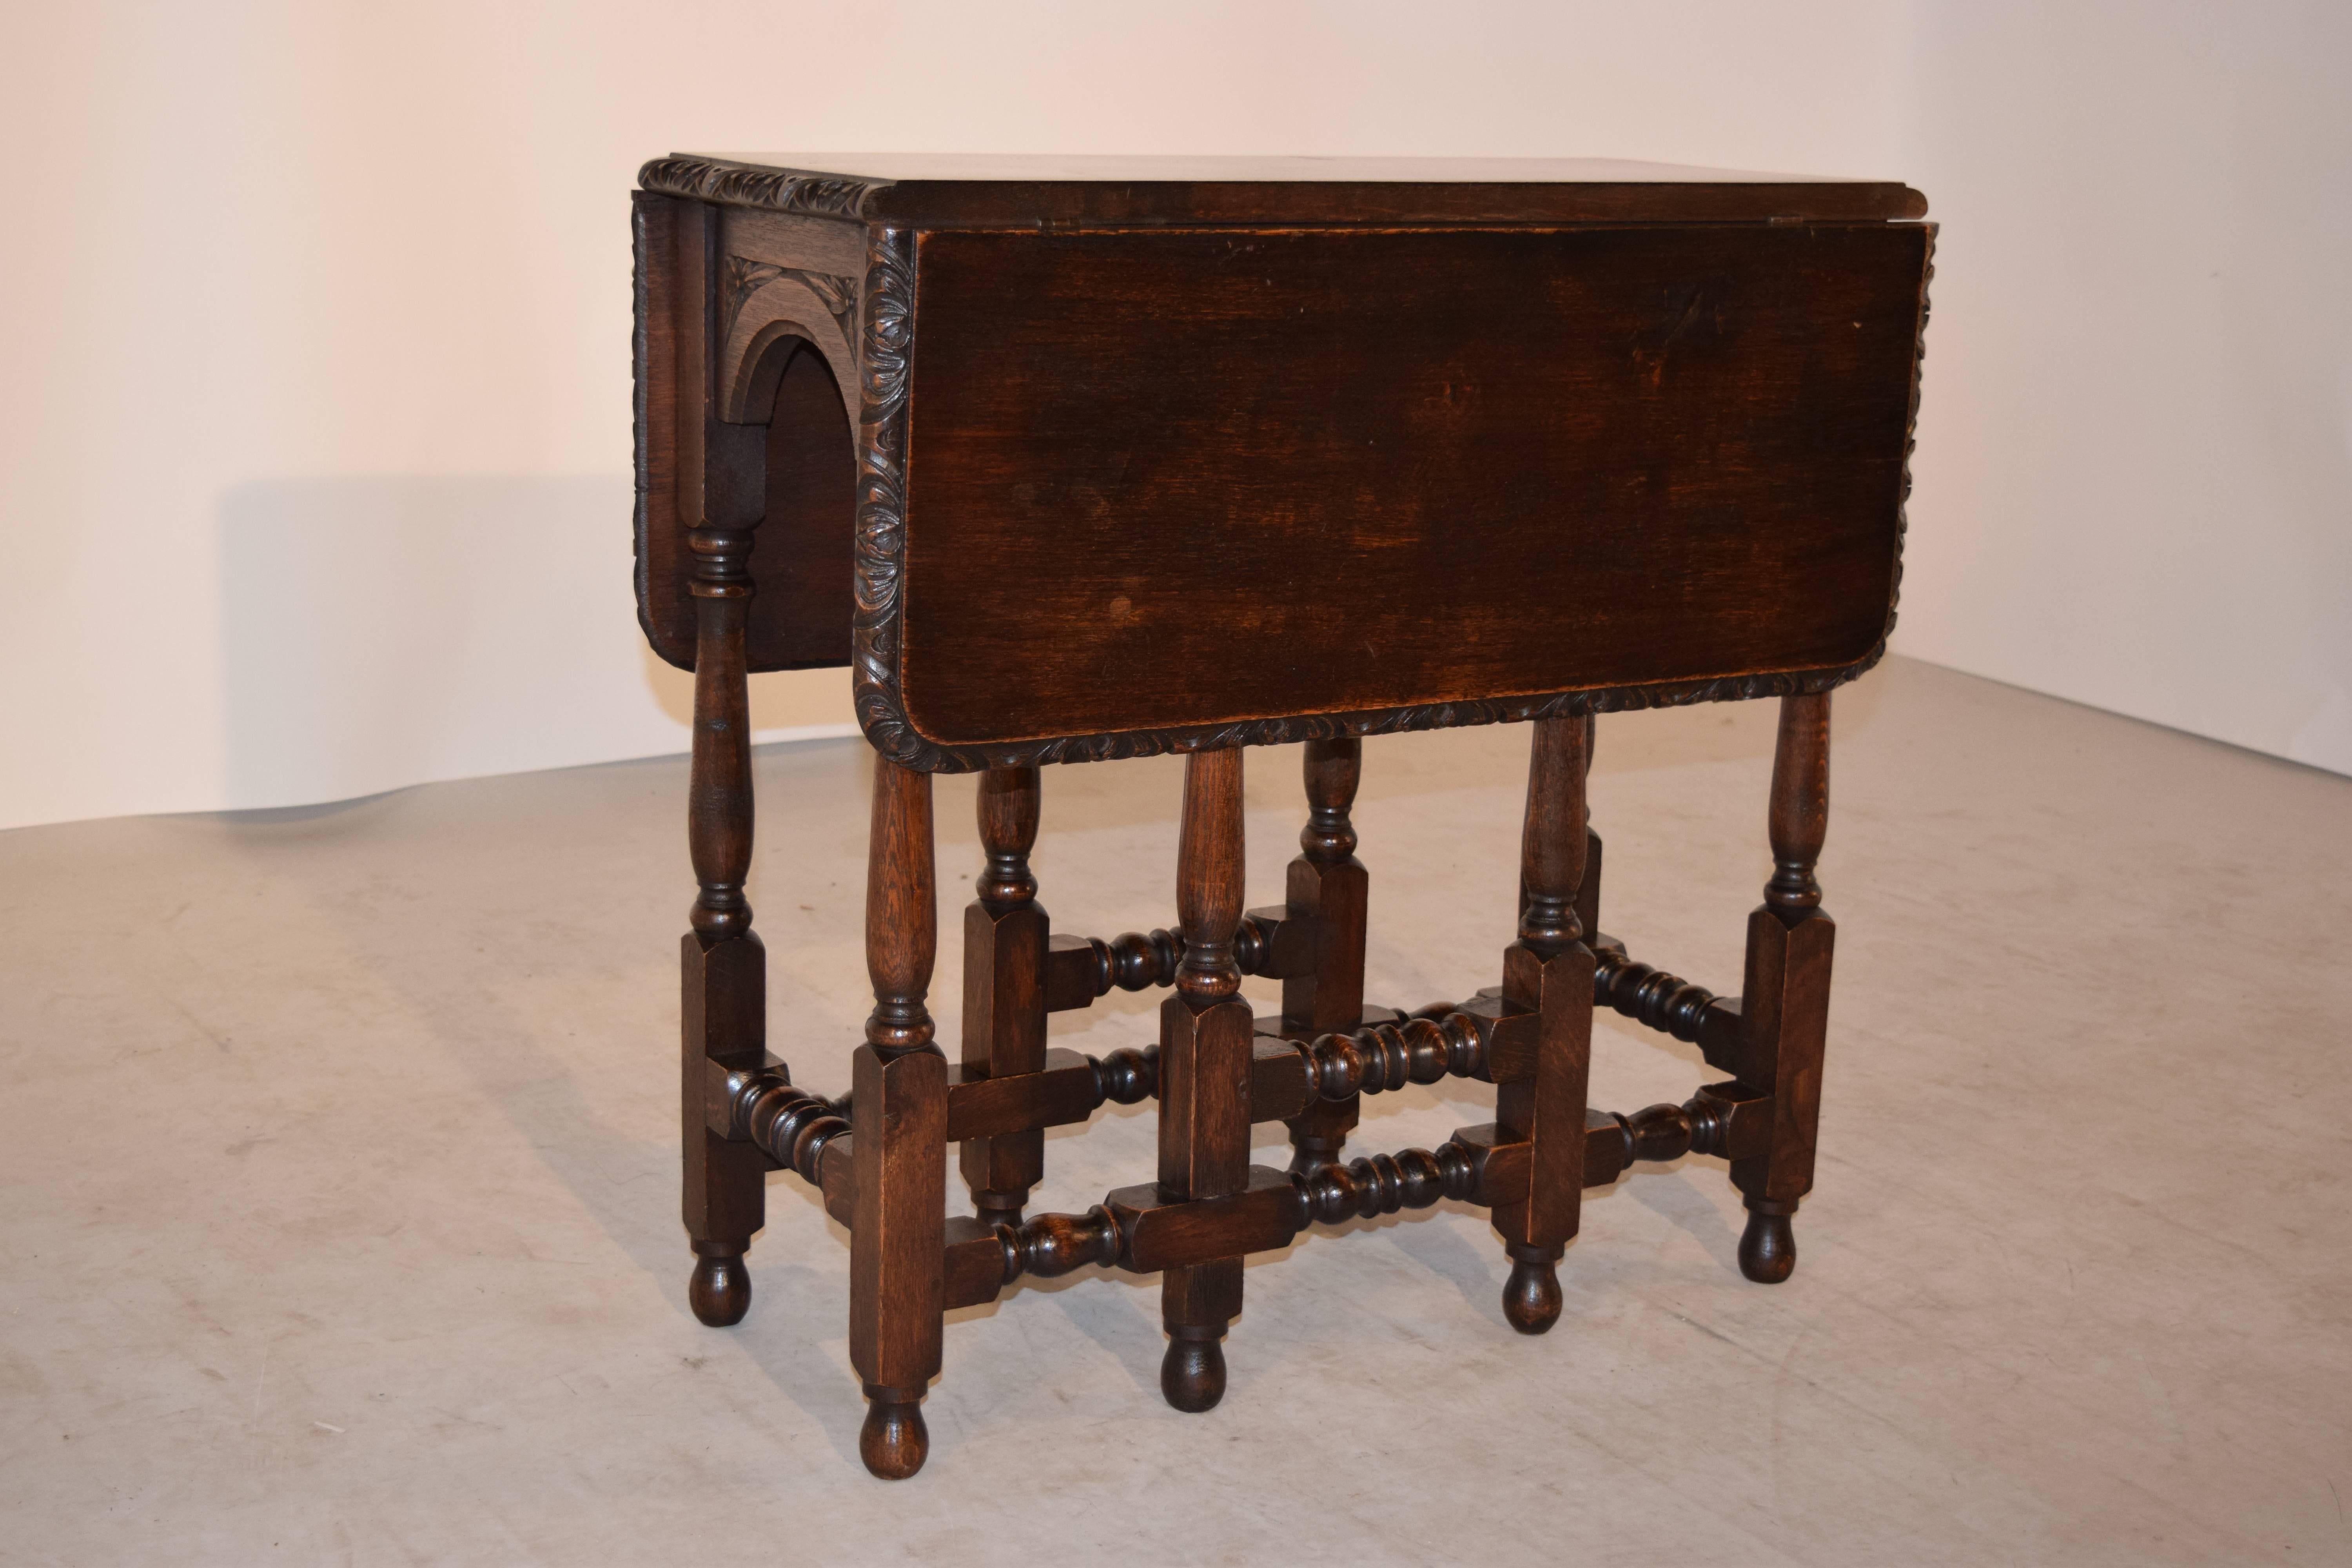 19th century English oak gate leg table with a rectangular shaped top. The top has a wonderfully hand-carved decorated edge, following down to arched and carved decorated aprons on the ends, and supported on hand-turned legs and feet. The top open